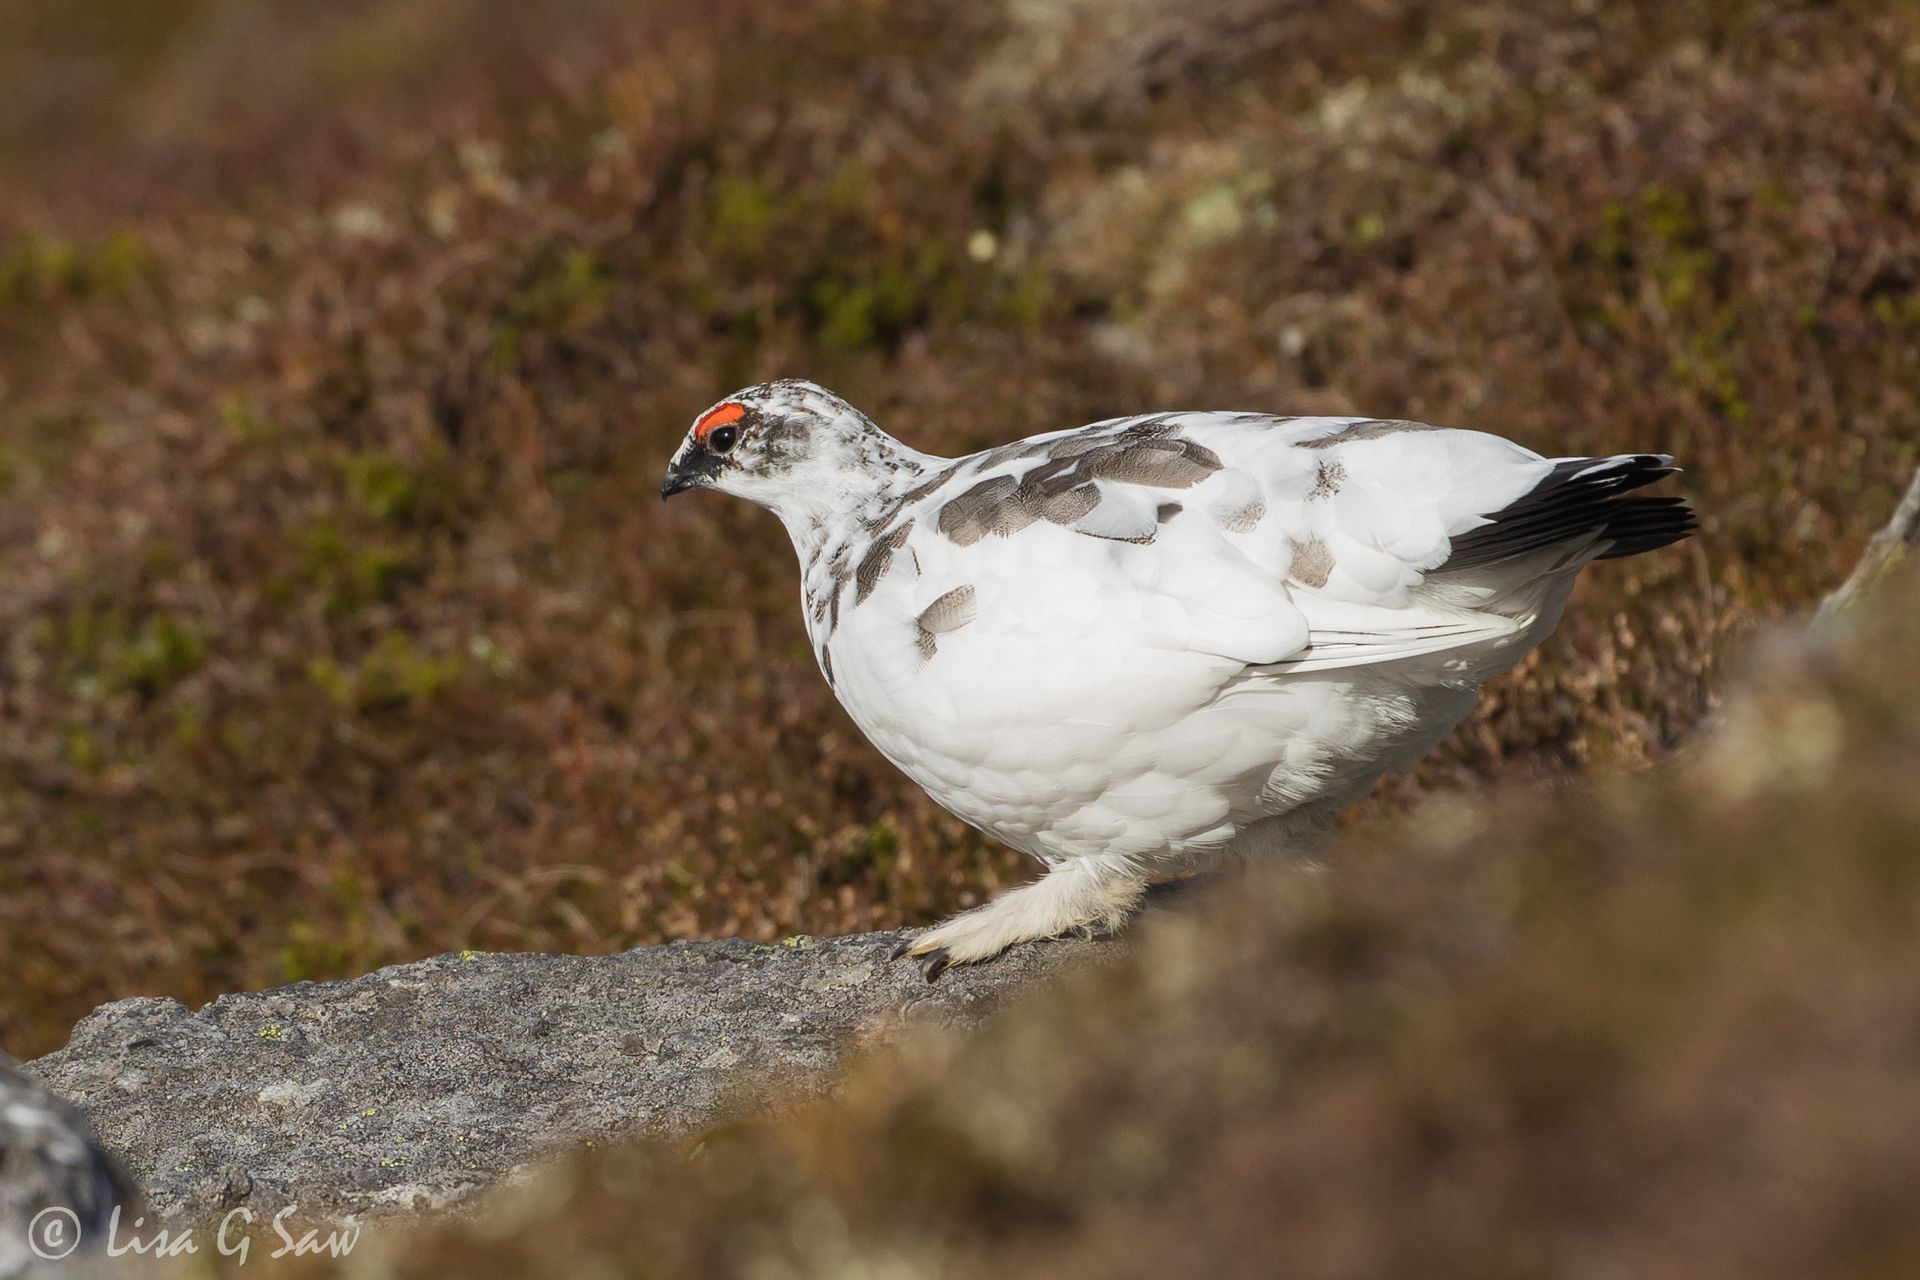 Male Ptarmigan changing into winter plumage